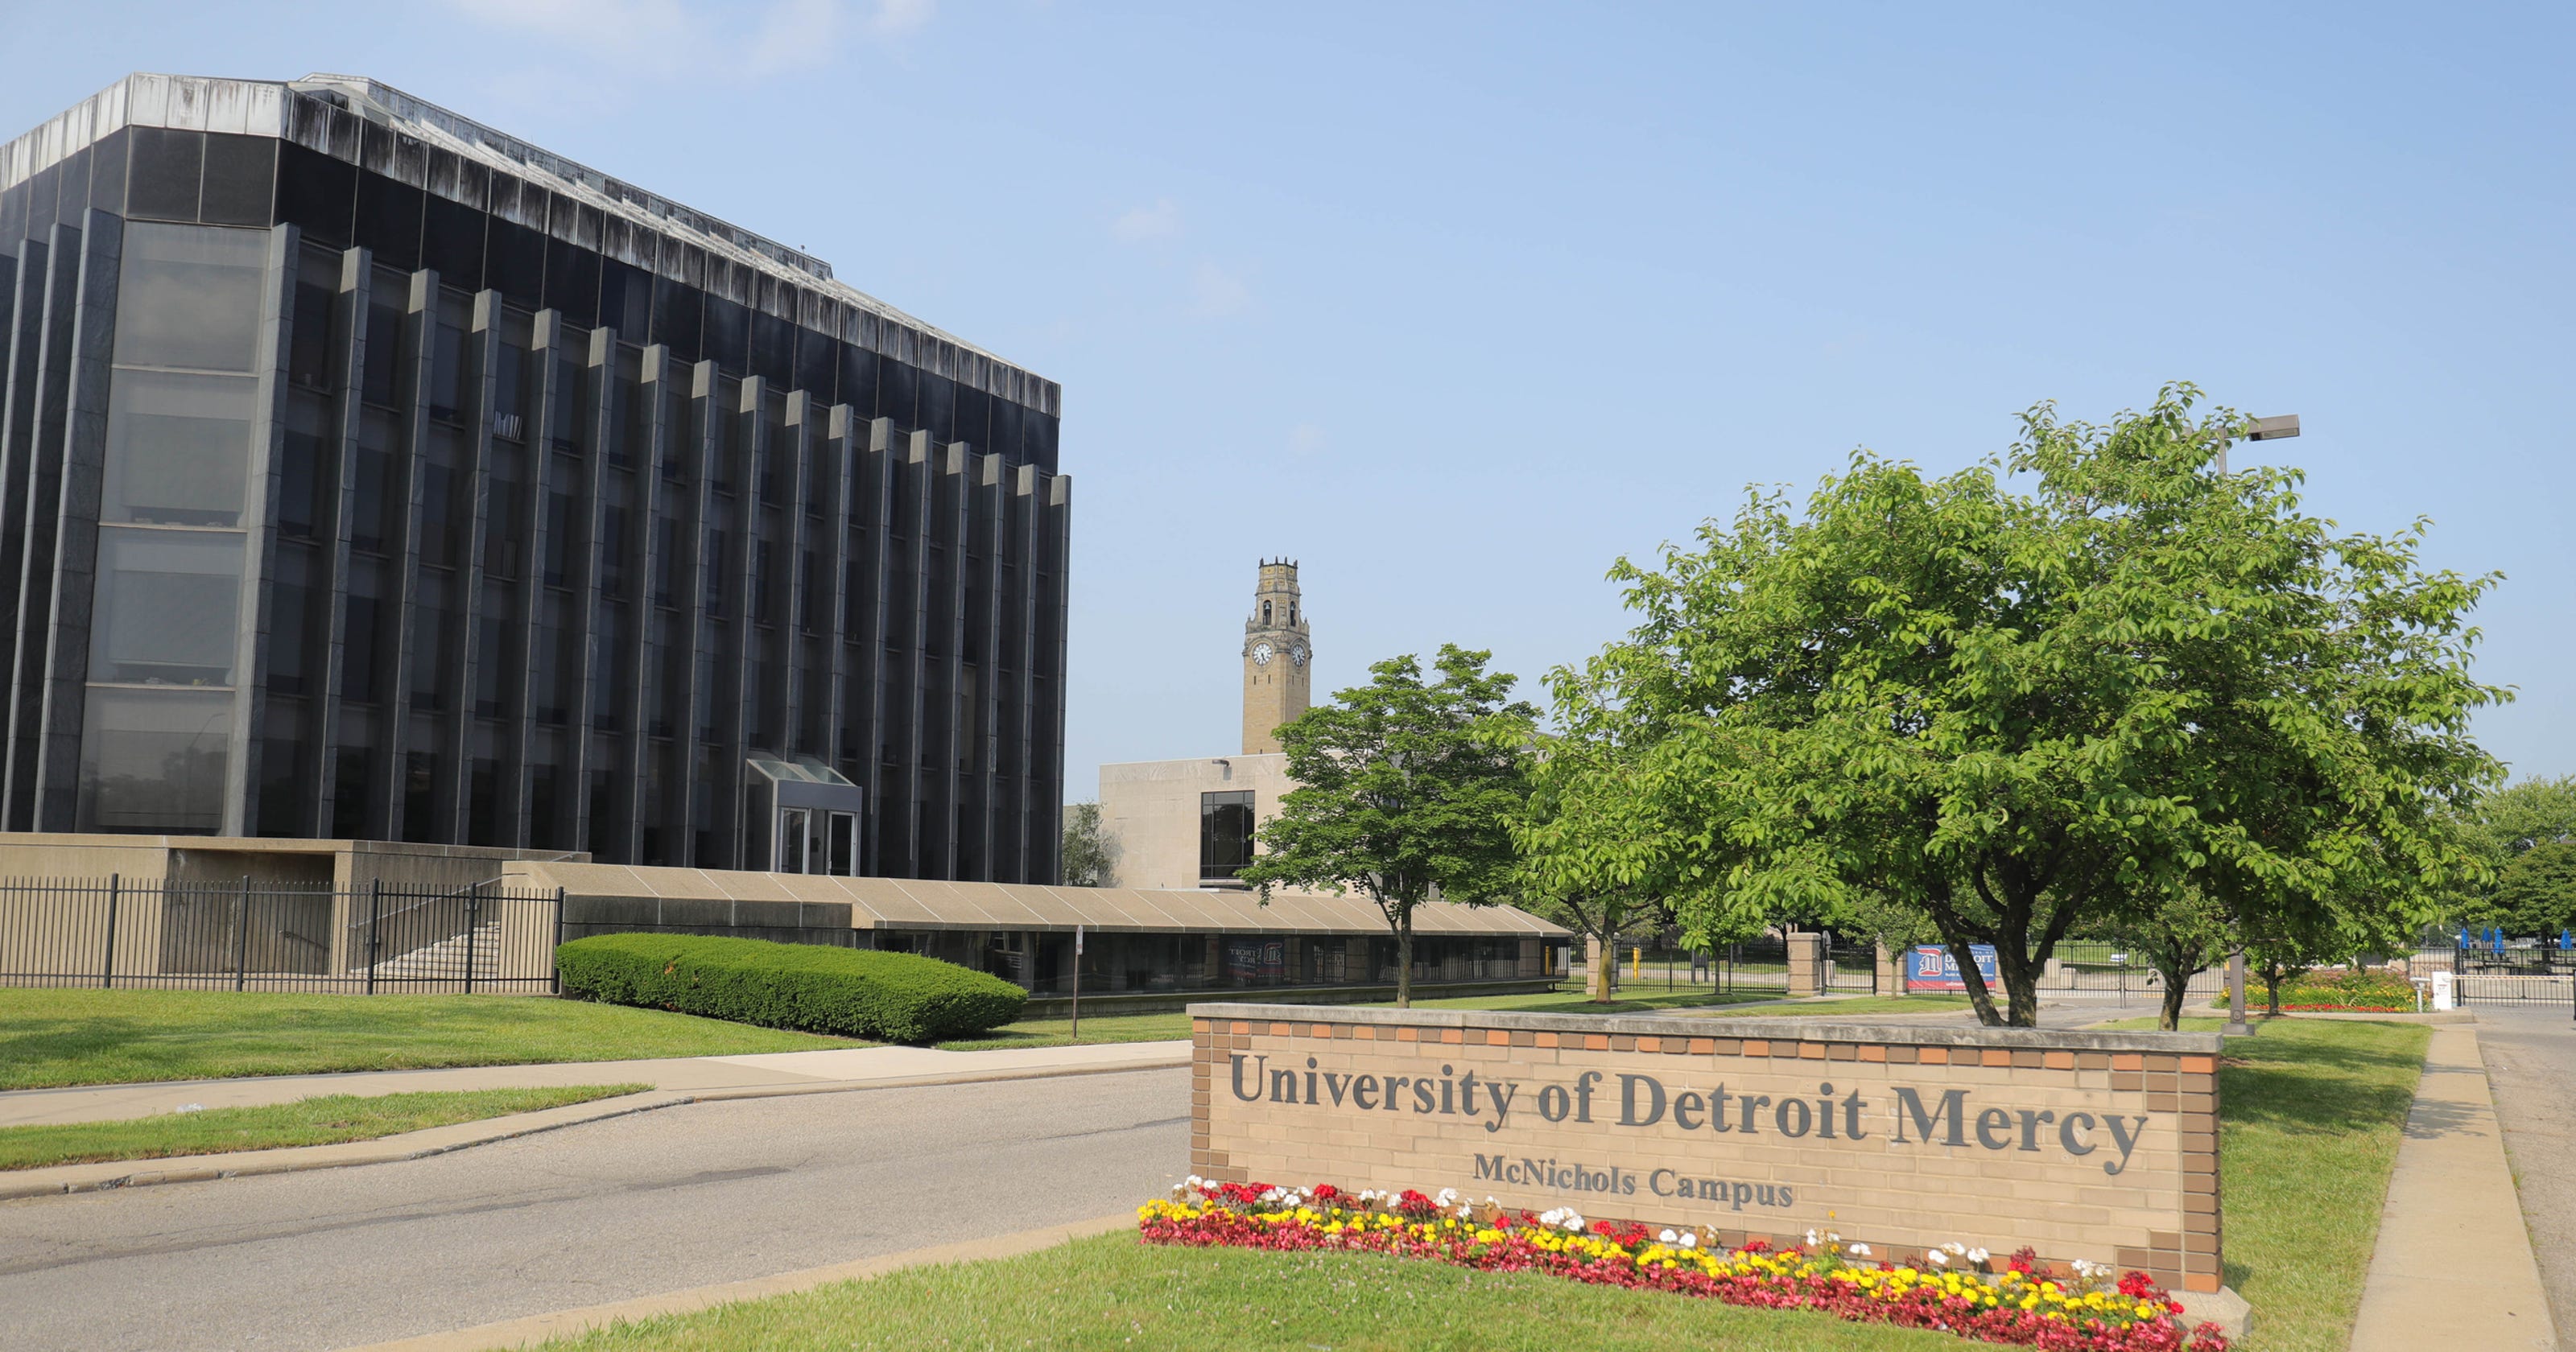 University Of Detroit Mercy To Cut Tuition For Some Graduate Programs